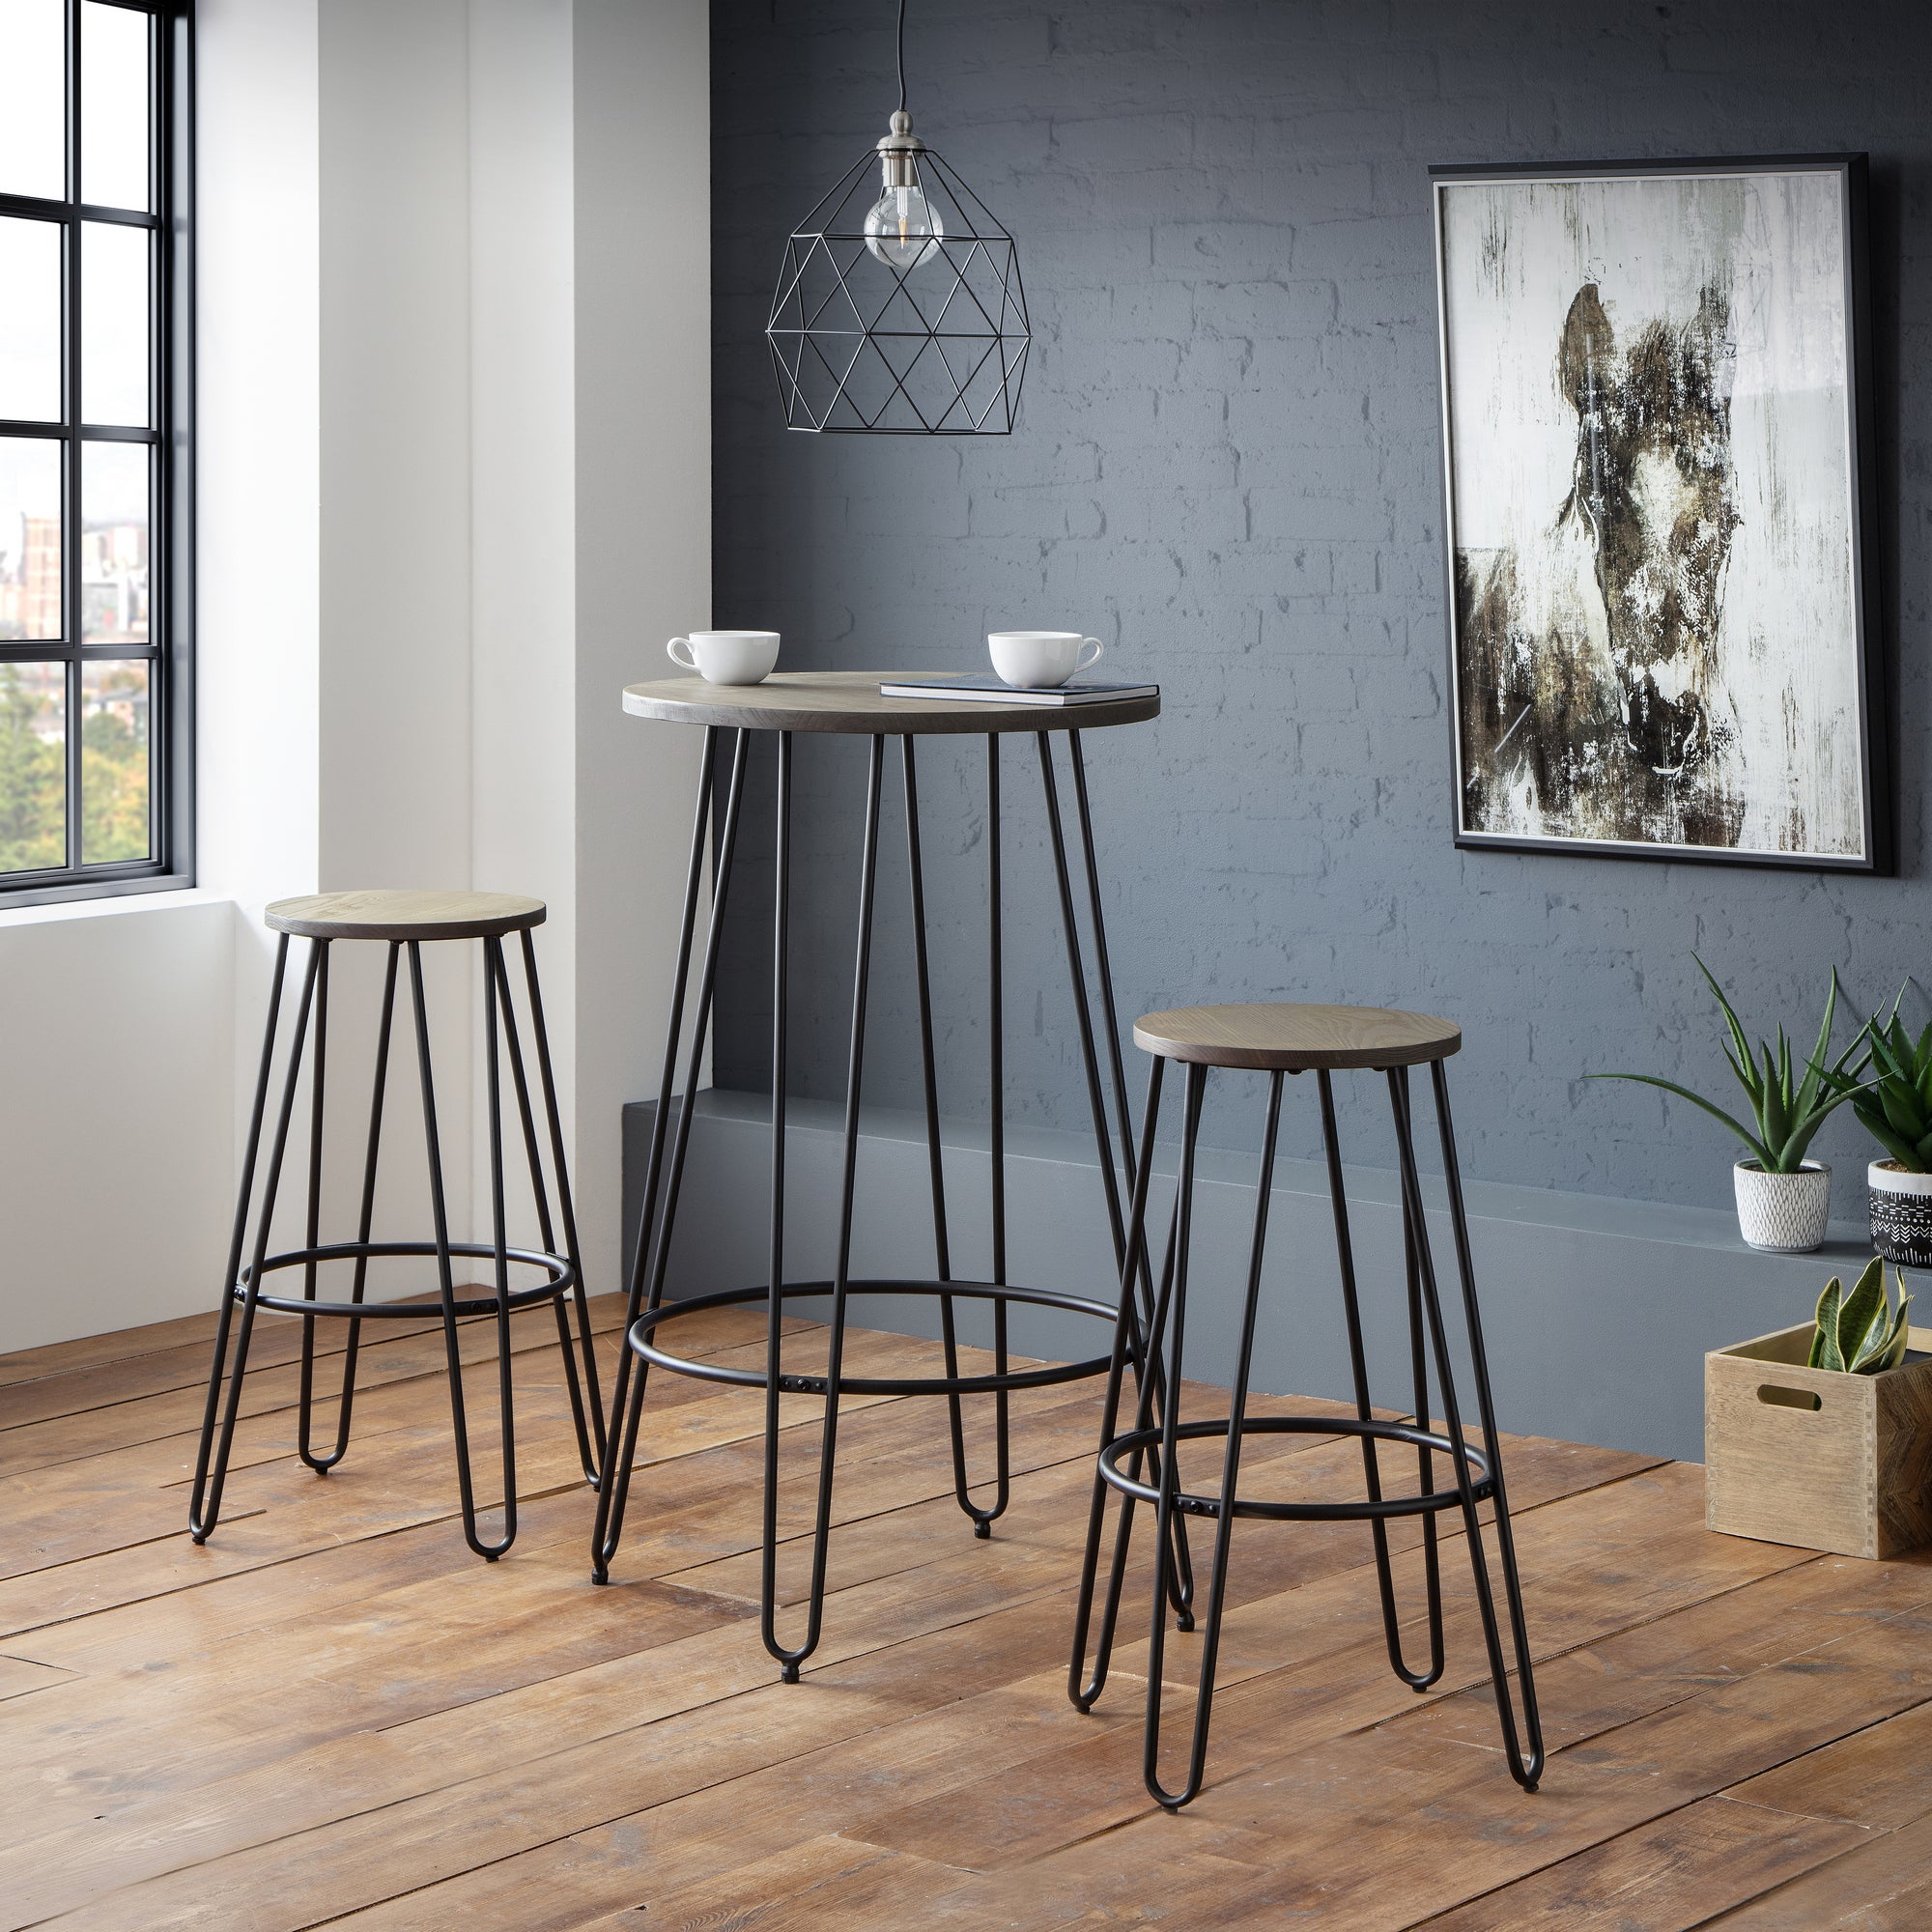 Dalston 4 Seater Round Bar Table Brownblack